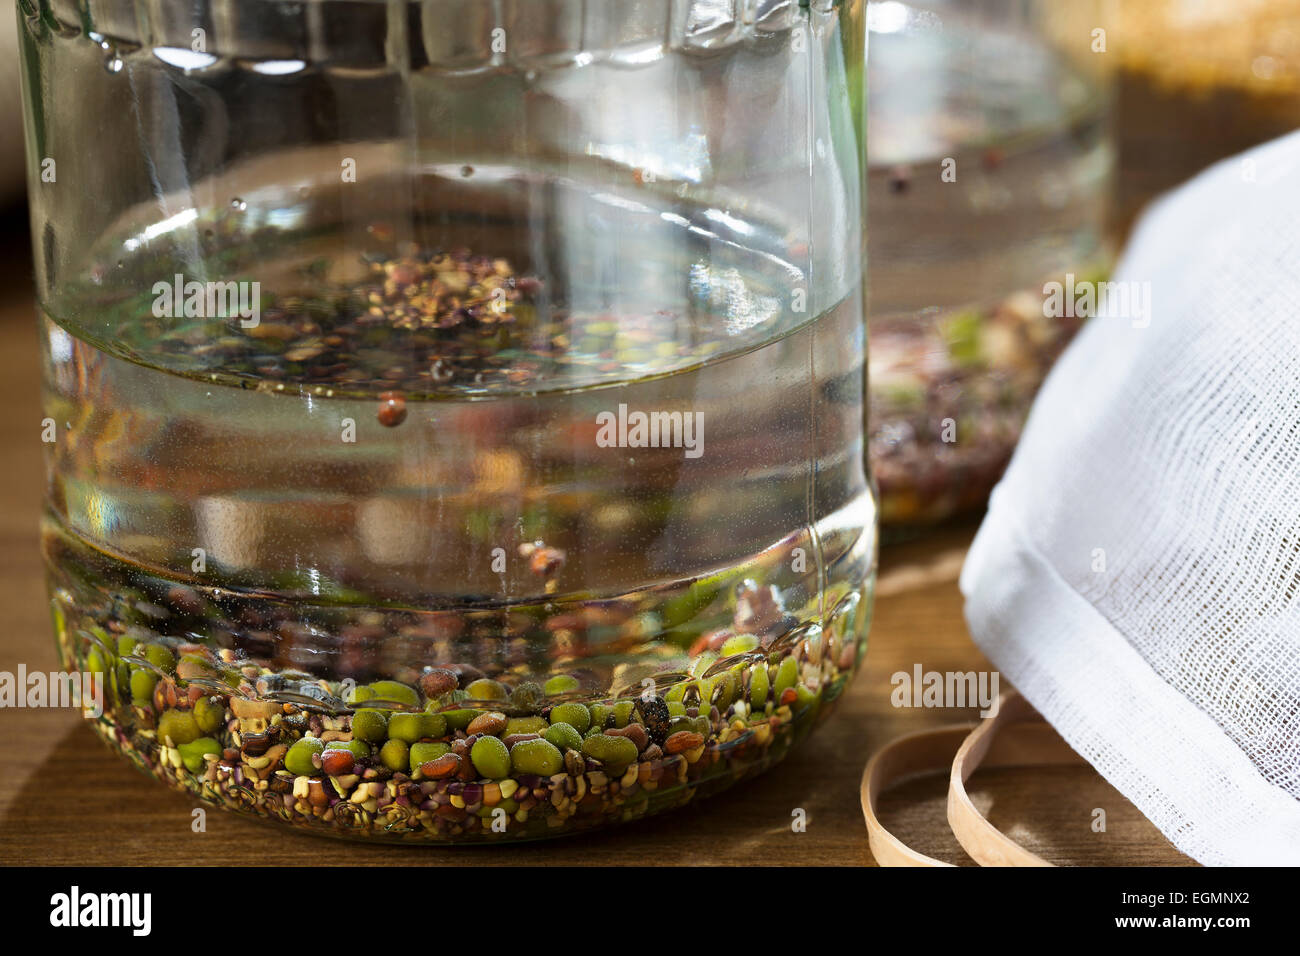 Mung beans and other beans and seeds in soaking in a sprouting jar. Stock Photo